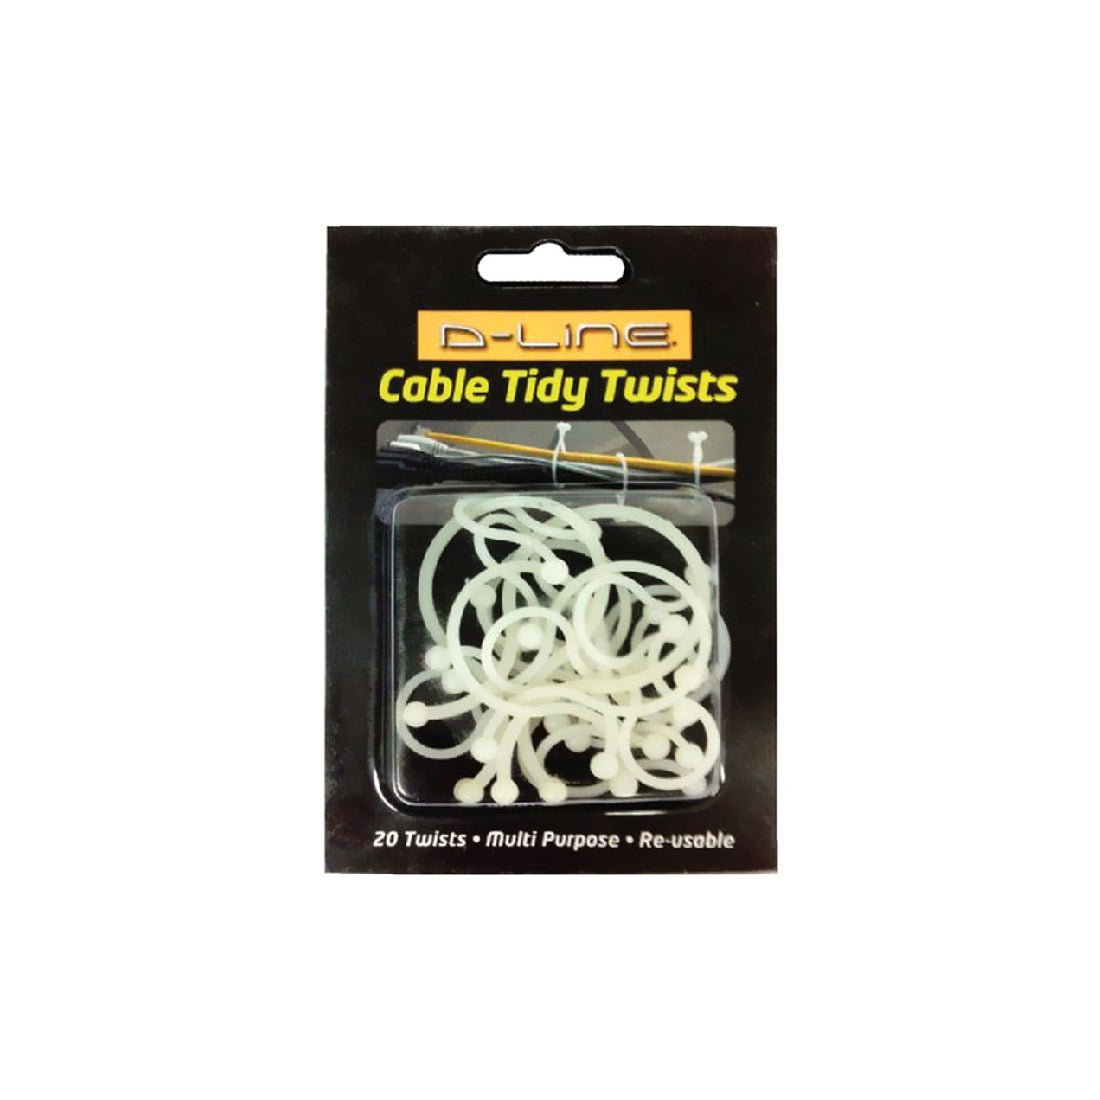 D-Line Cable Tidy Twists - 20 Pieces - أكسسوارات - Store 974 | ستور ٩٧٤